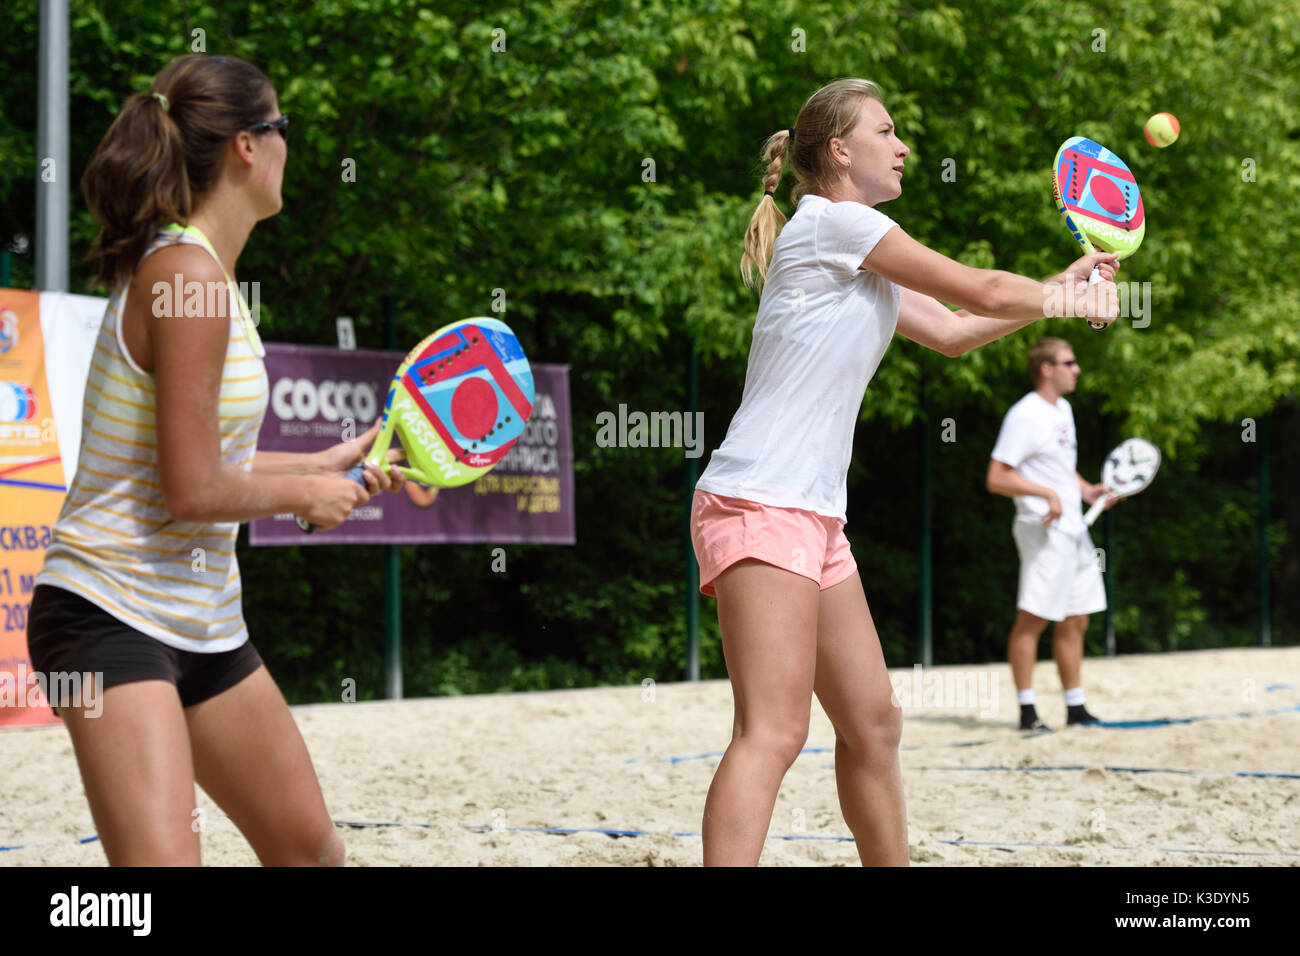 Moscow, Russia - May 30, 2015: Yulia Chubarova (left) and Irina Glimakova in the match of Russian beach tennis championship. 120 adults and 28 young a Stock Photo